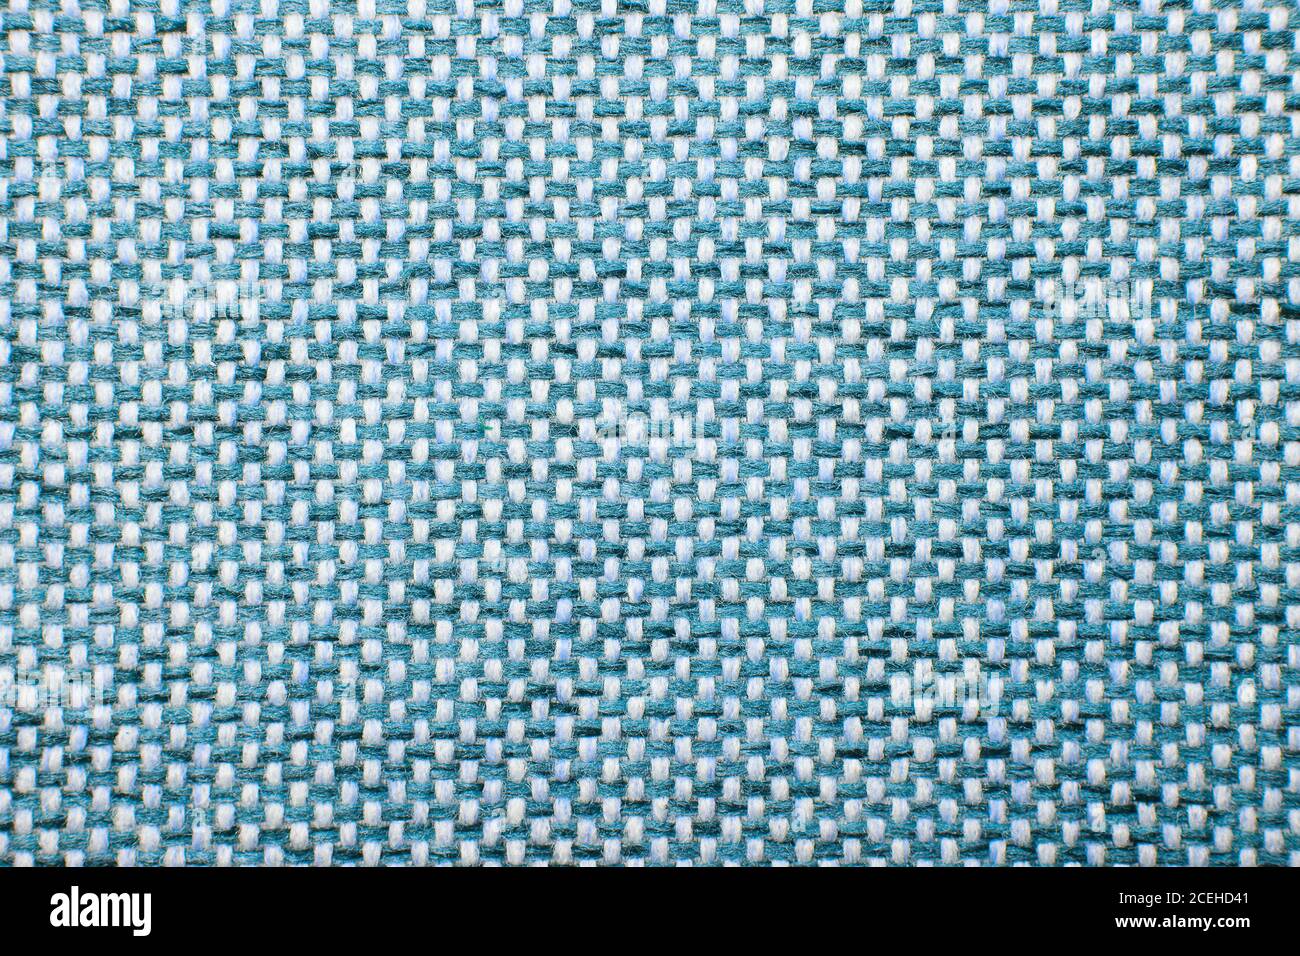 Blue checkered Rough Fabric Texture, Pattern, Background Stock Photo